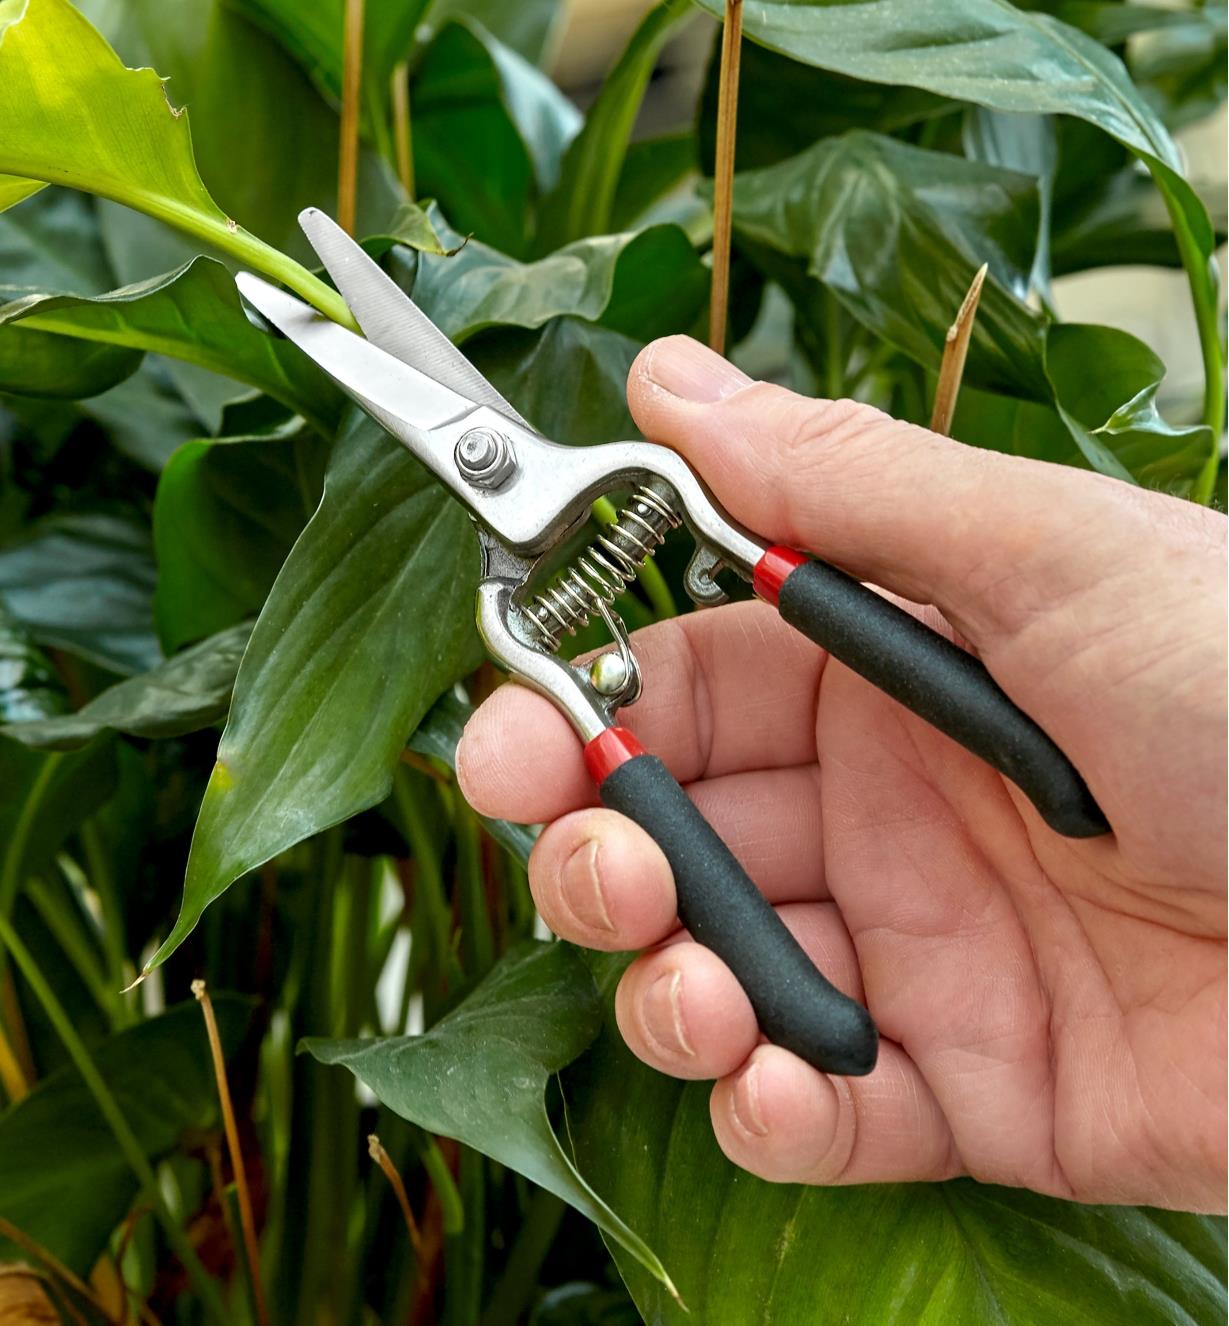 6" pruning shears being used to prune a plant